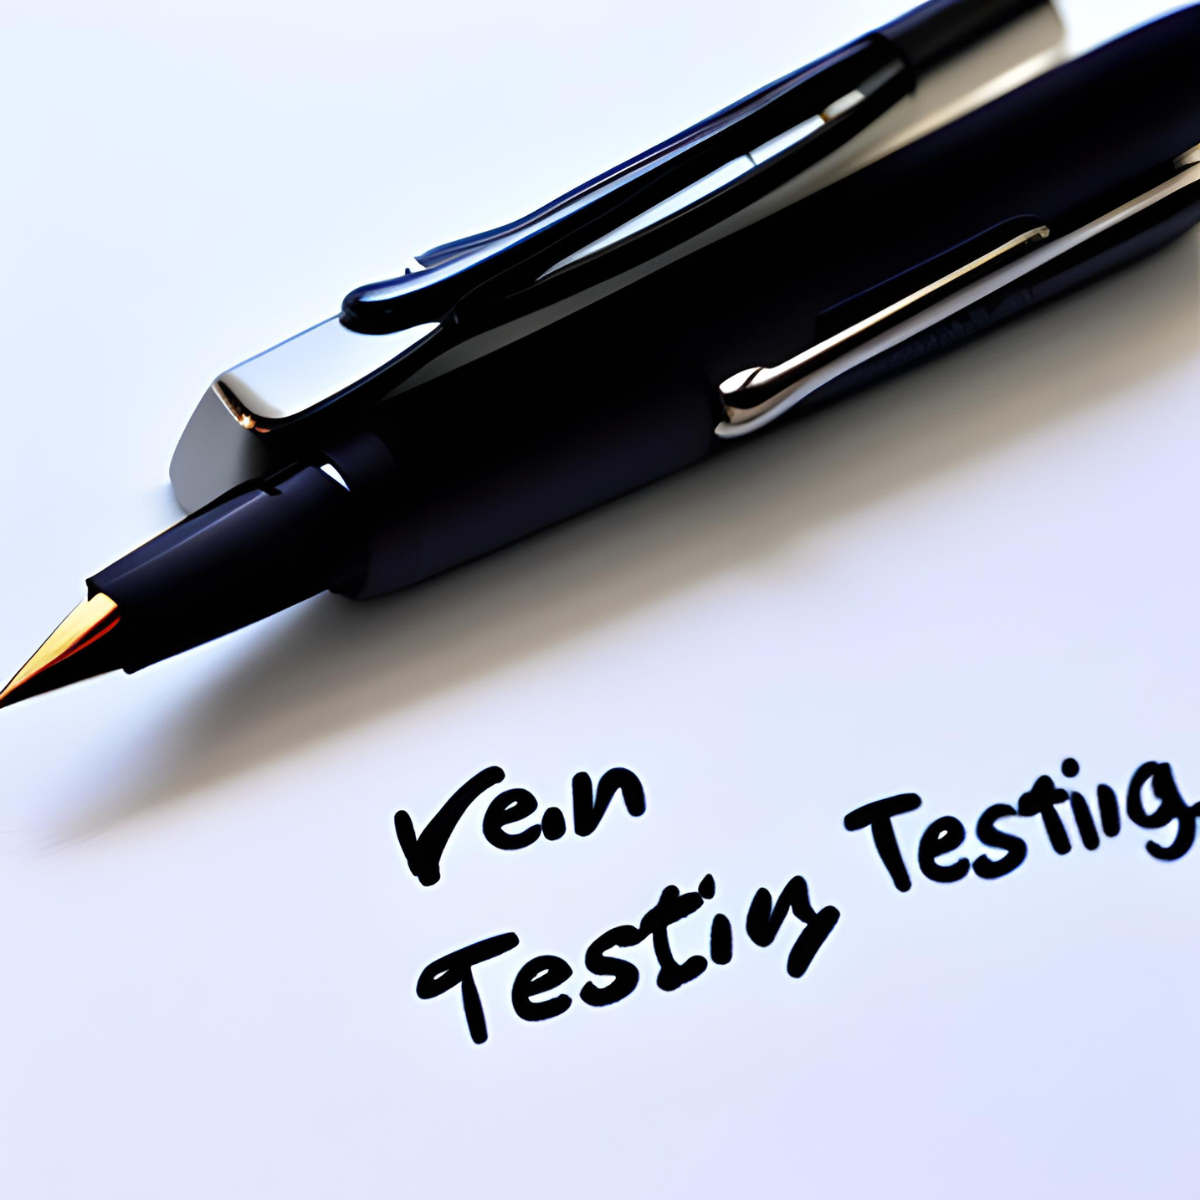 Pen Test?  Why Do I Have to Have My Pens Tested?